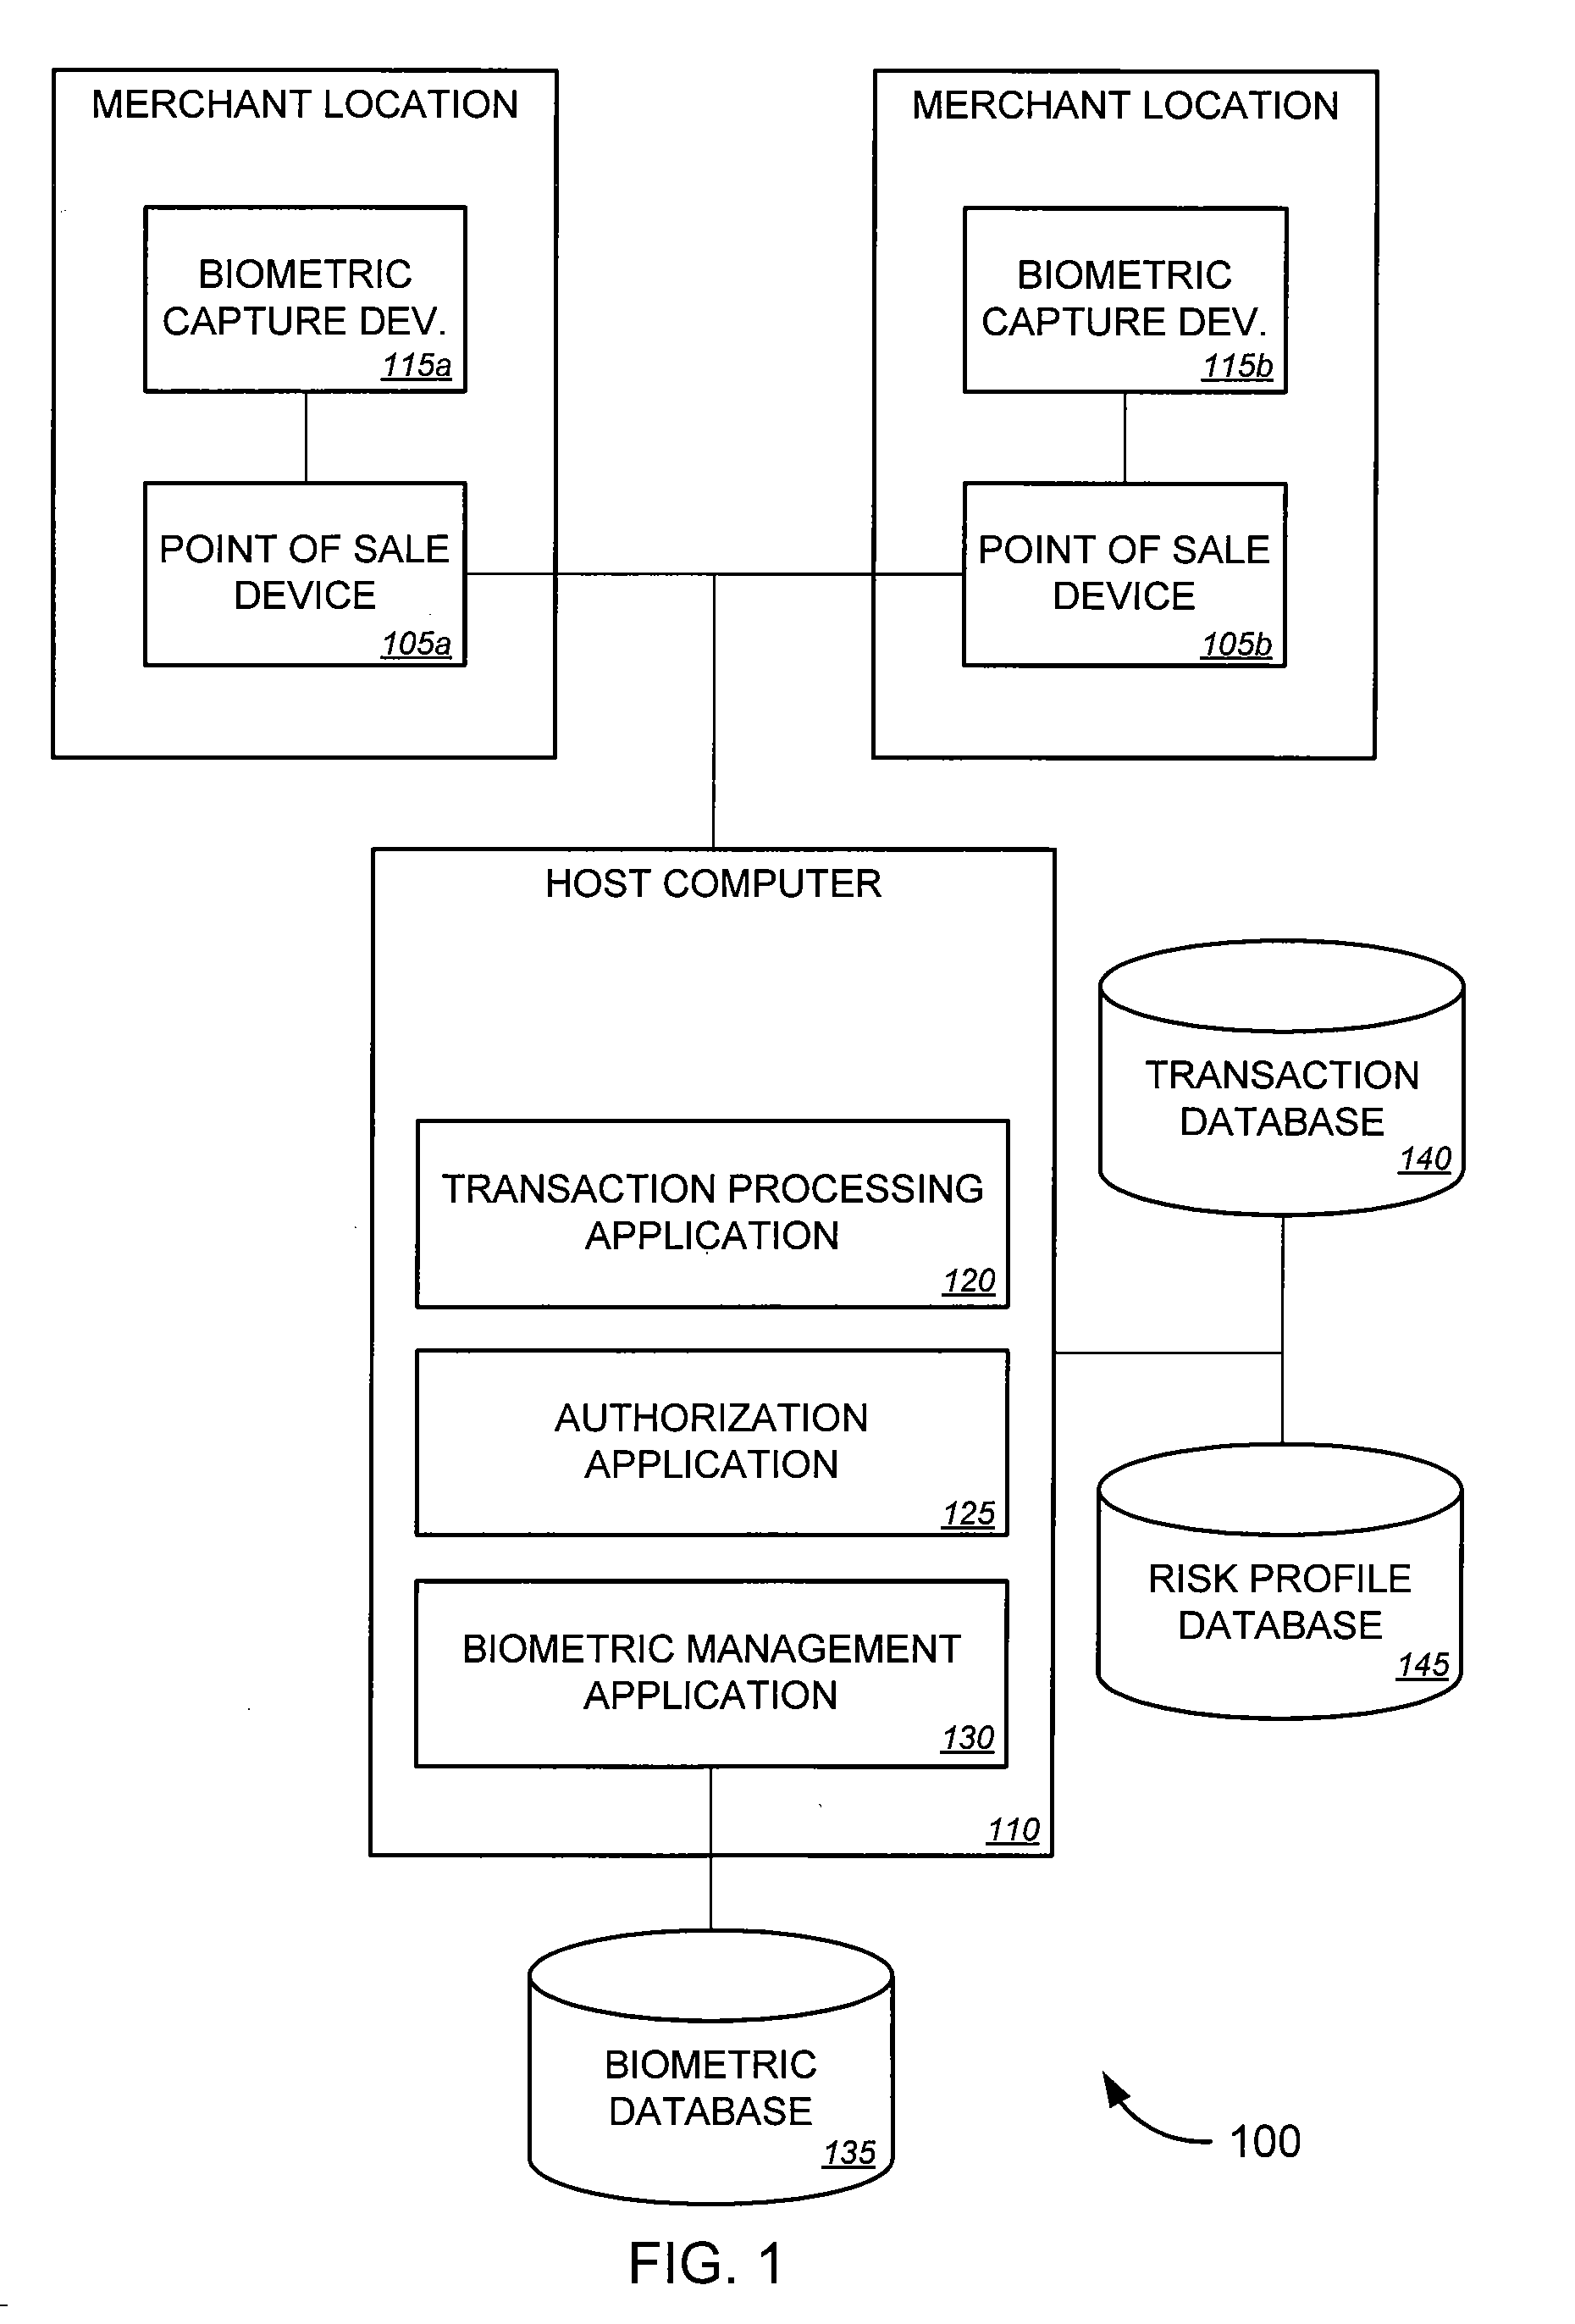 Authenticated third-party check cashing